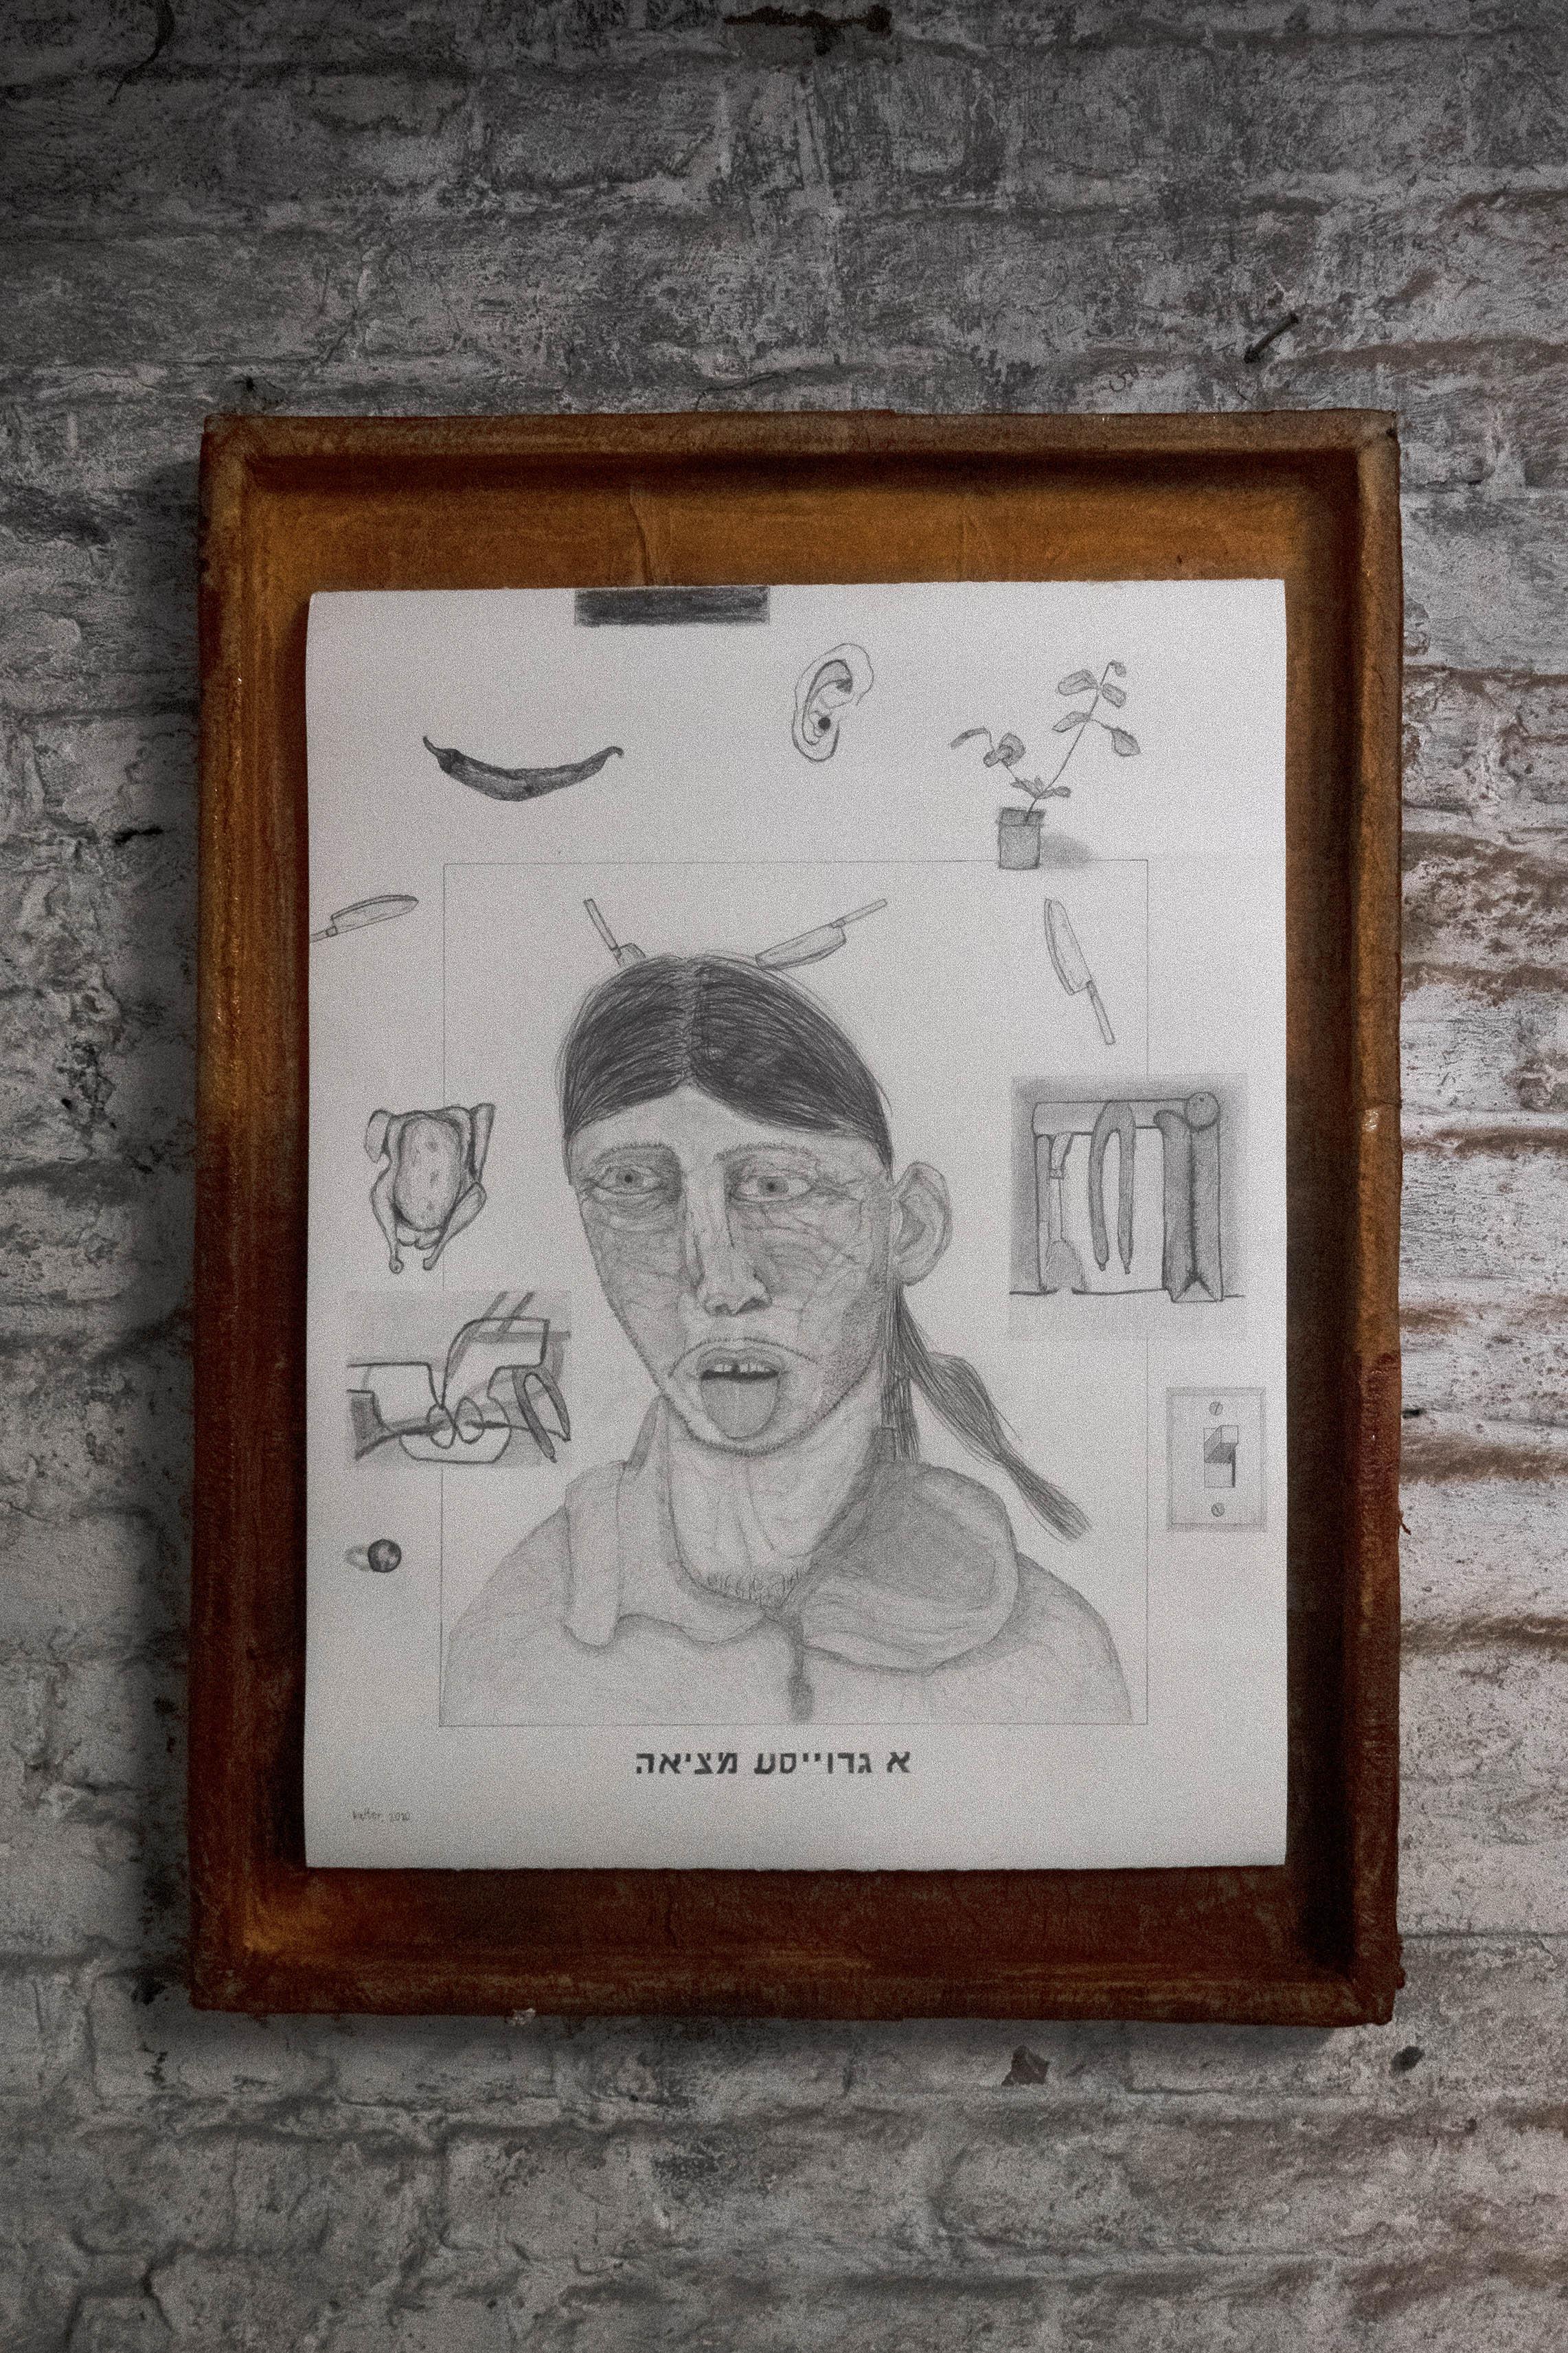 I. S. Kalter, "Great Bargain" 2020â€“22. Pencil and graphite on paper, artist frame, 65x50 cm (with frame, 80x60x4 cm)